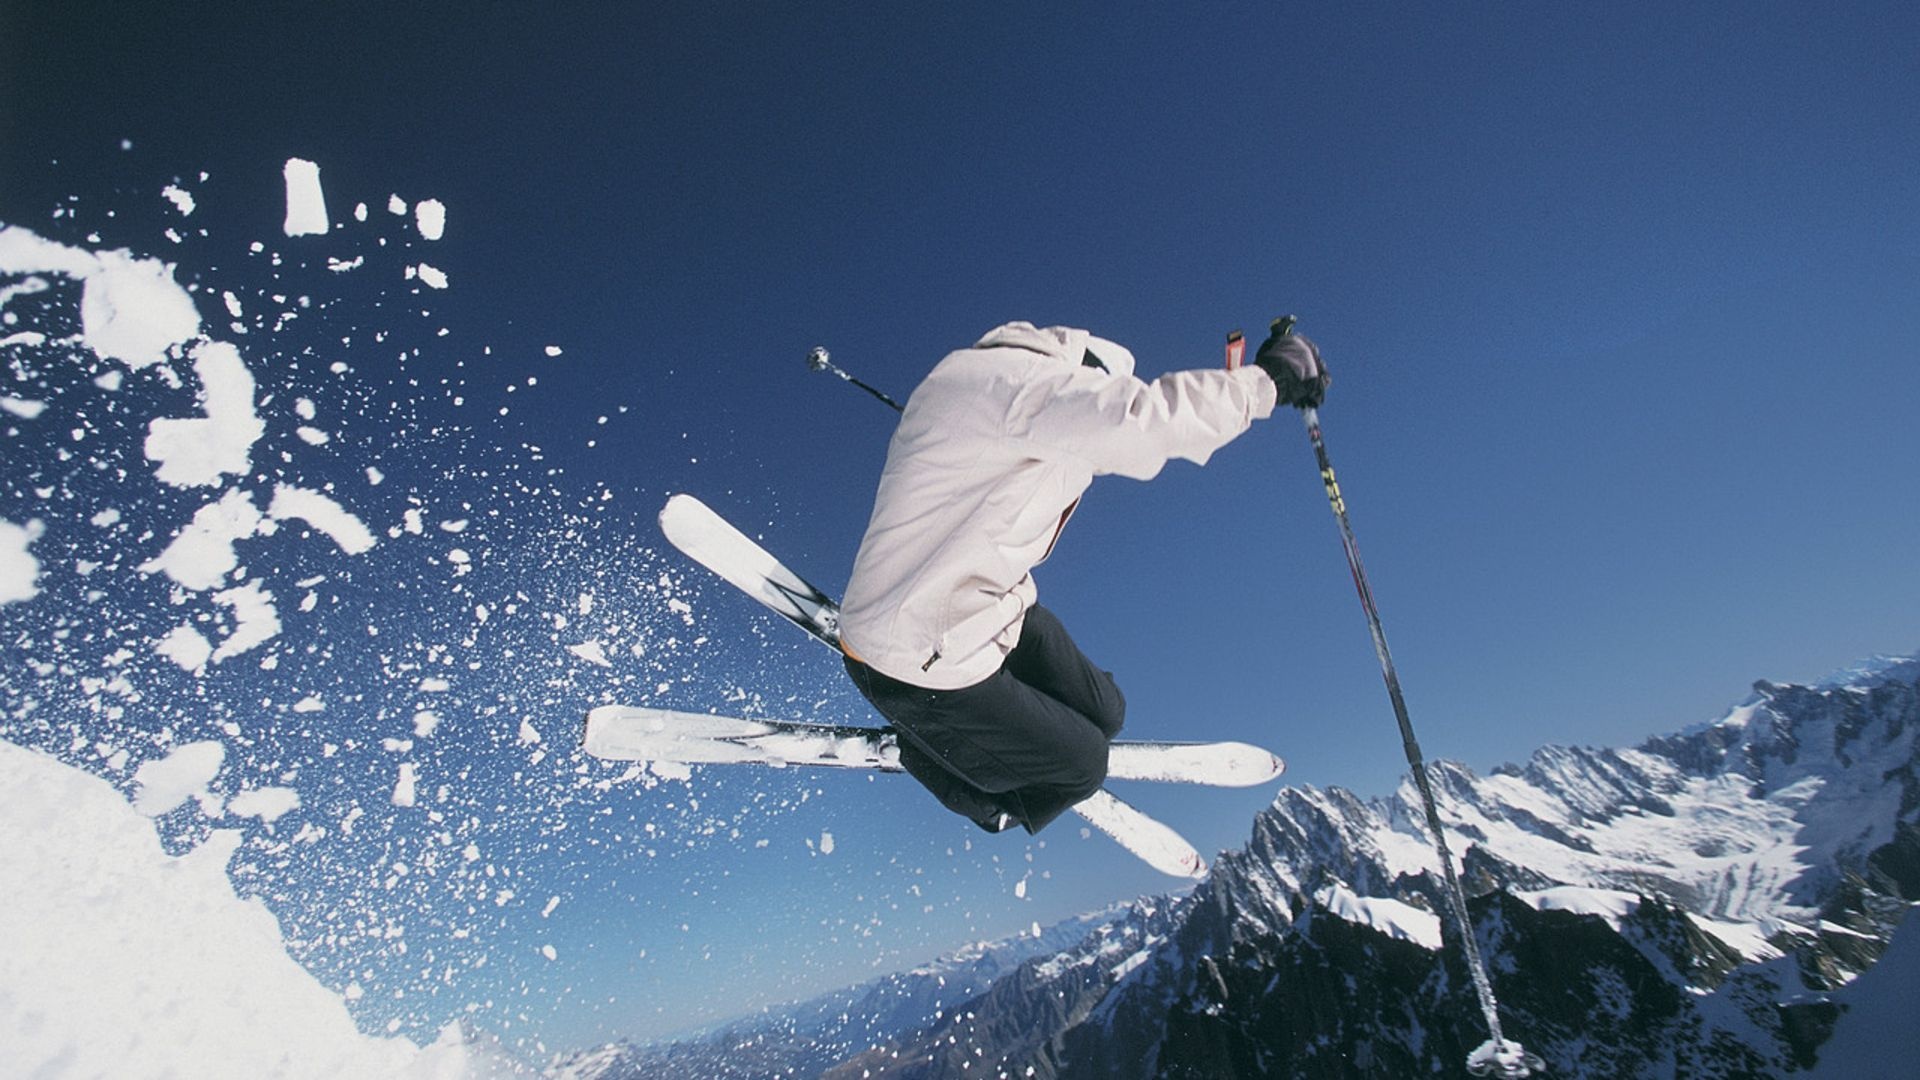 Alpine Skiing: Freestyle winter sports, Powder skiing, Downhill in a wavy course. 1920x1080 Full HD Wallpaper.